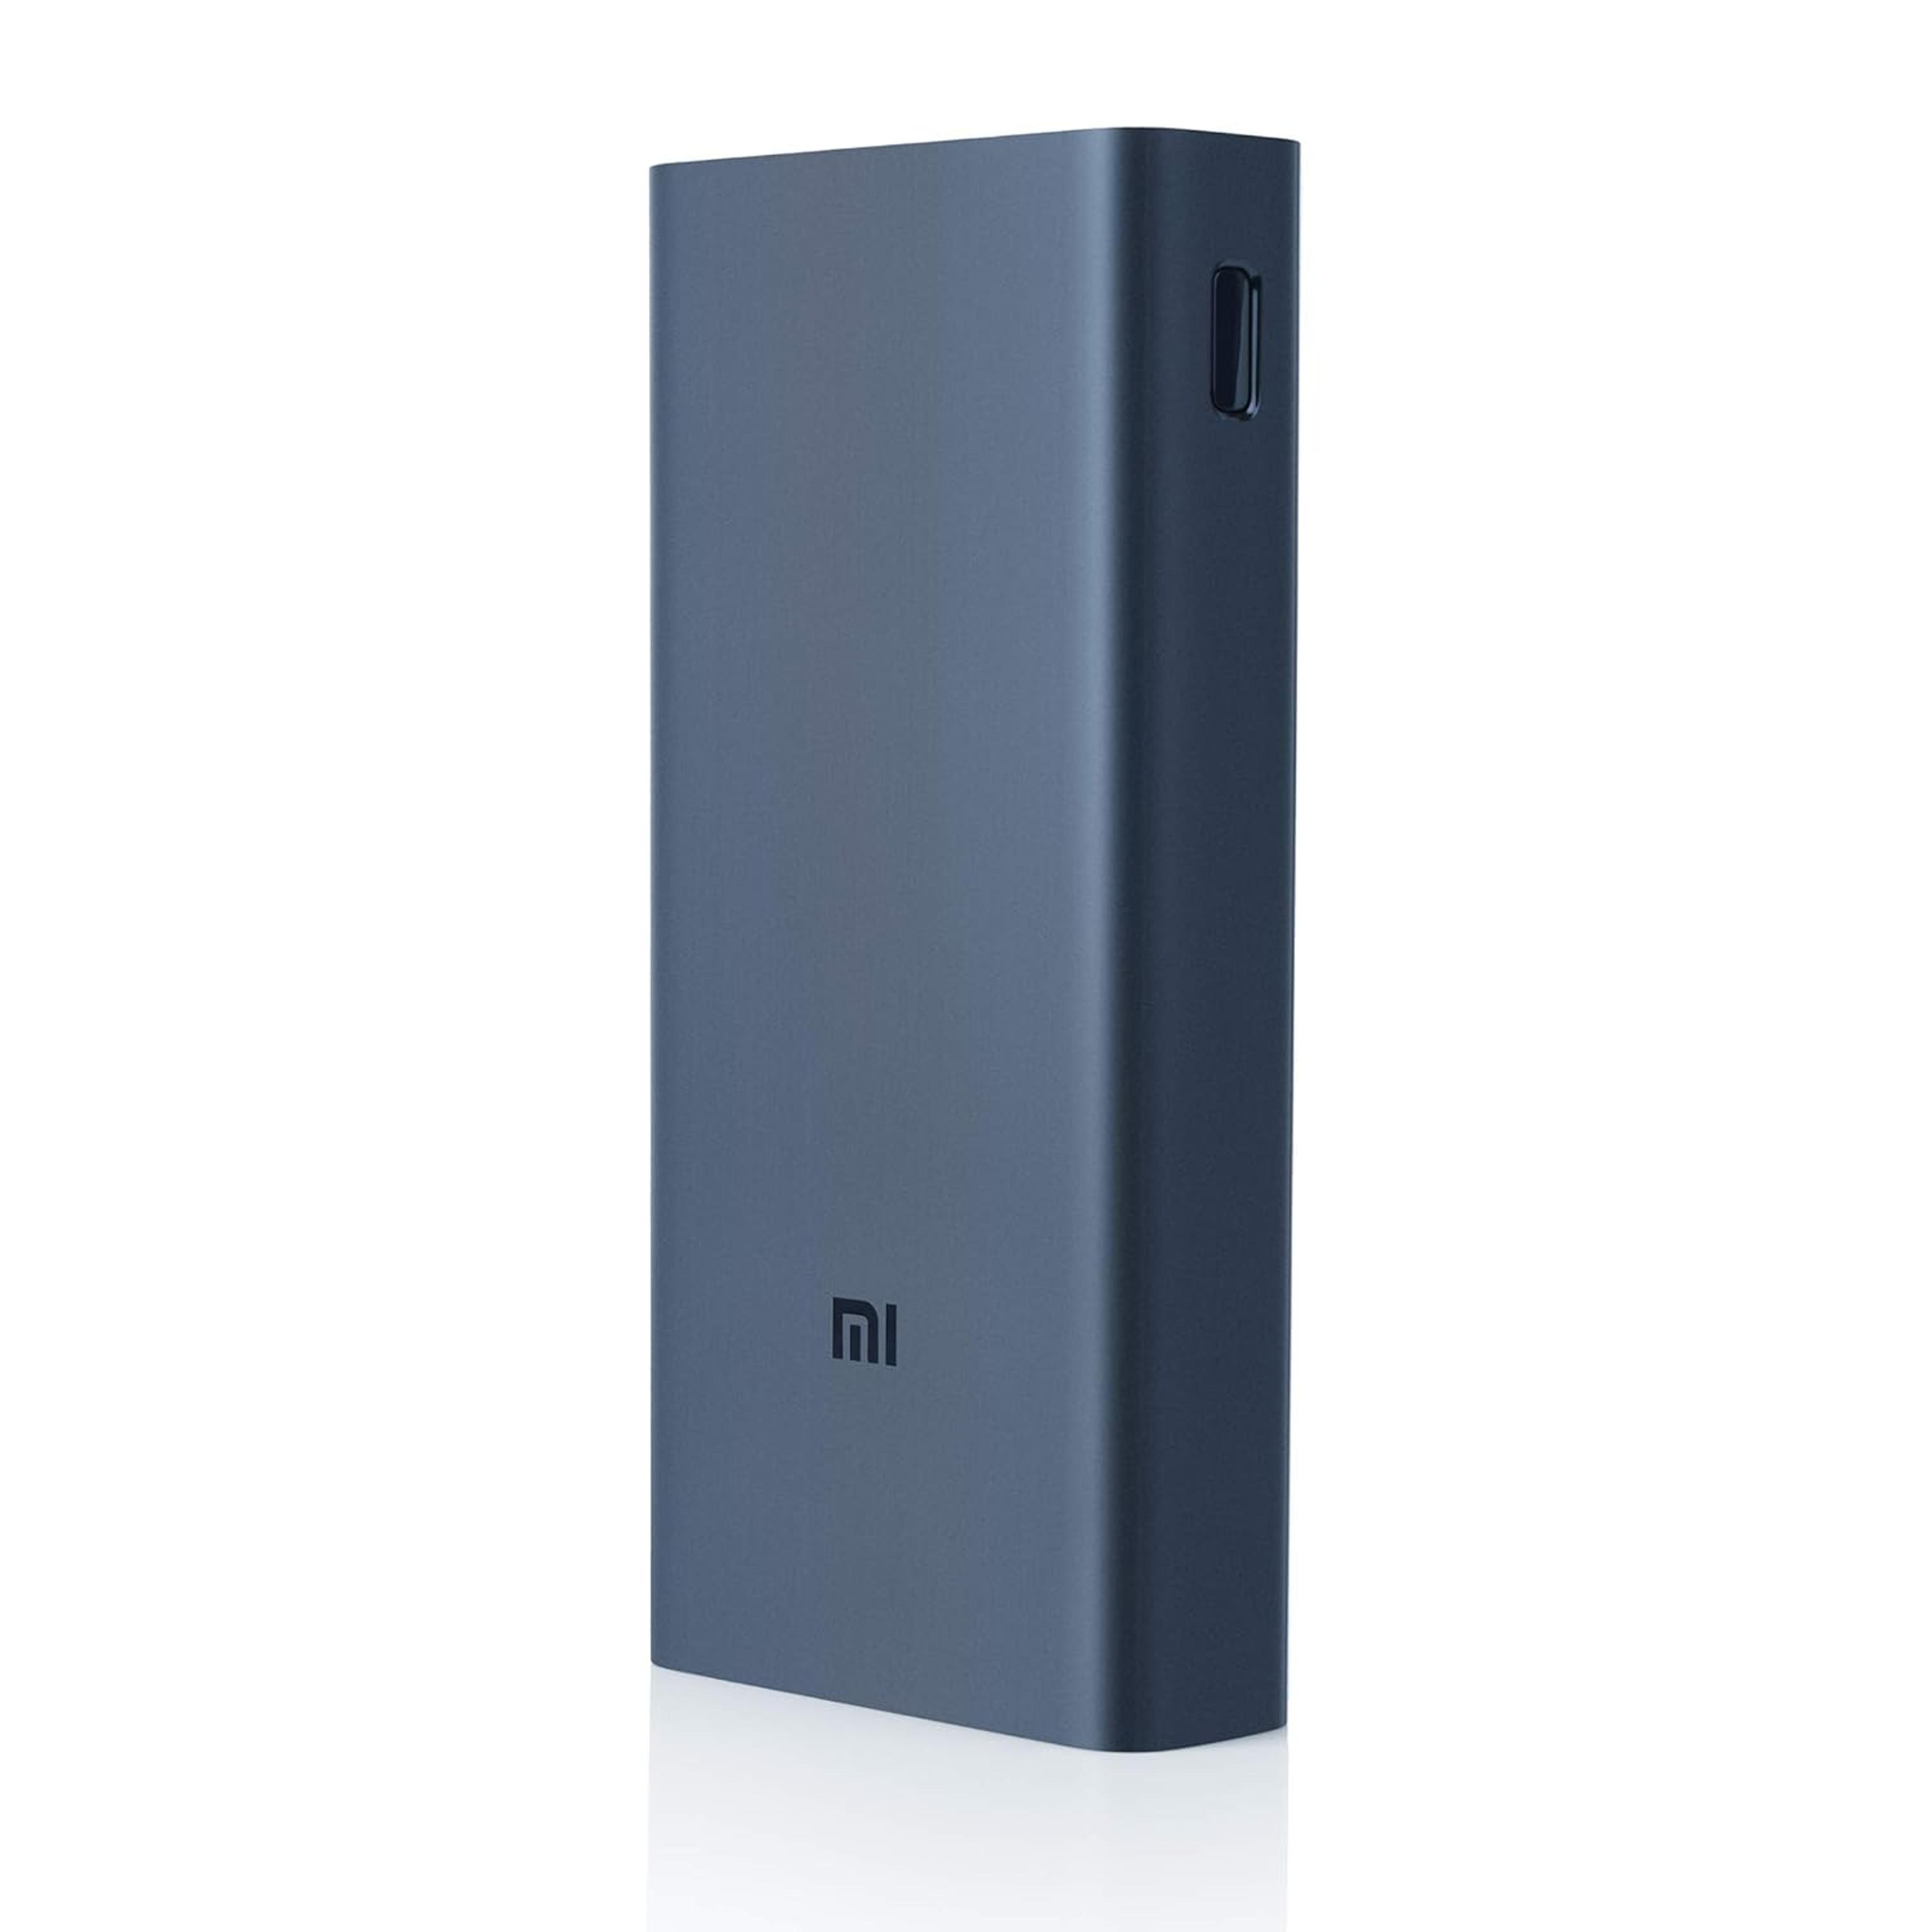 MI Power Bank 3i 20000mAh Lithium Polymer 18W Fast Power Delivery Charging | Input- Type C | Micro USB| Triple Output | Sandstone Black : Amazon.in: Electronics